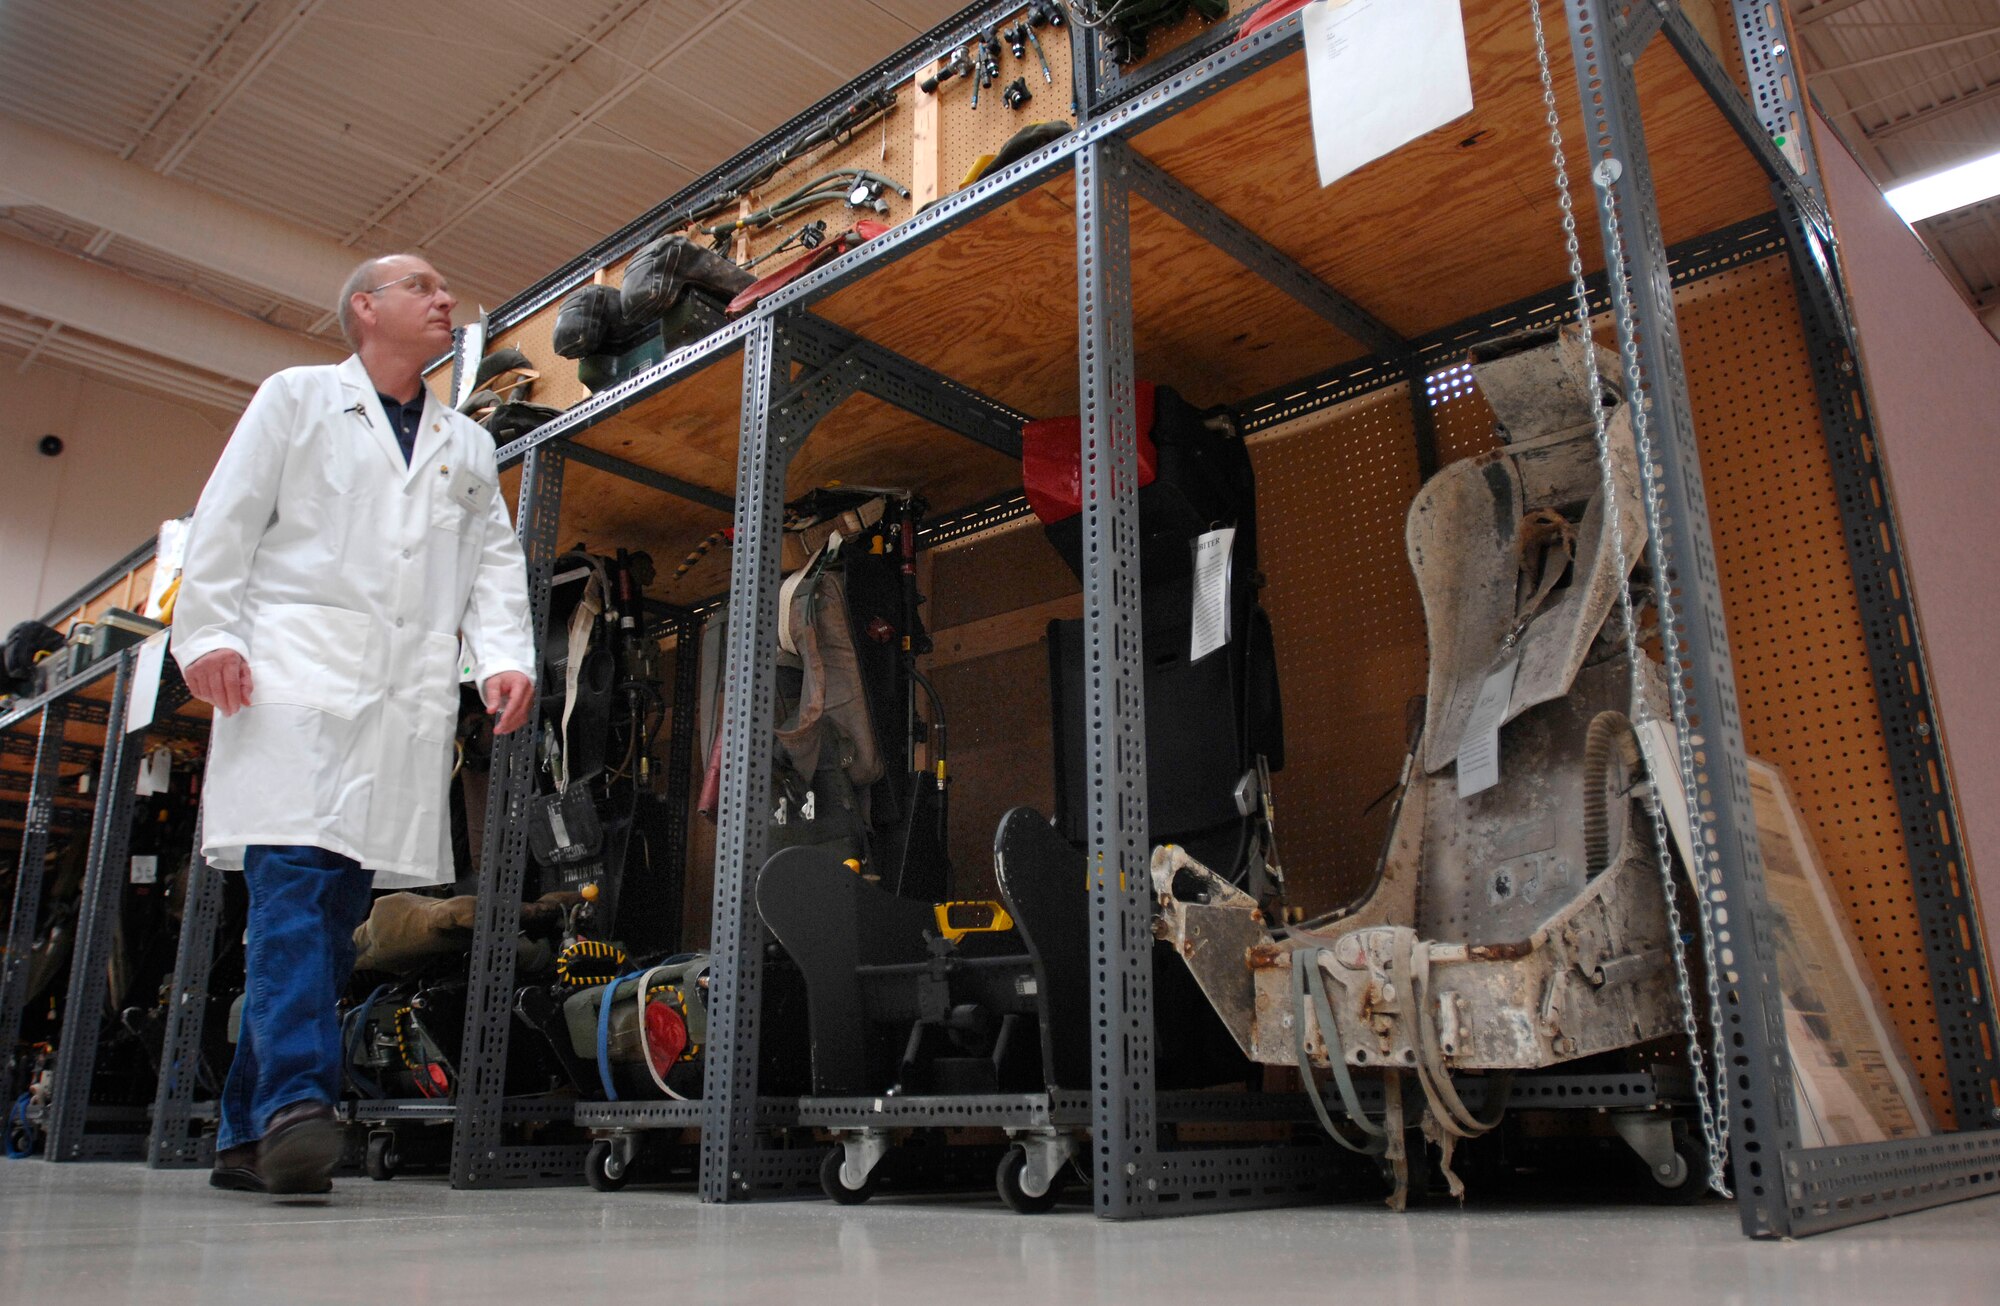 Equipment analyst Jim Hodges walks past rows of ejection seats at the 21,000-square-foot Life Sciences Equipment Laboratory at Brooks City-Base in San Antonio. The lab is home to more than 50,000 uniforms and pieces of equipment from as far back as World War I. About 250 ejection seats line the walls. DoD photo by Fred W. Baker III  
